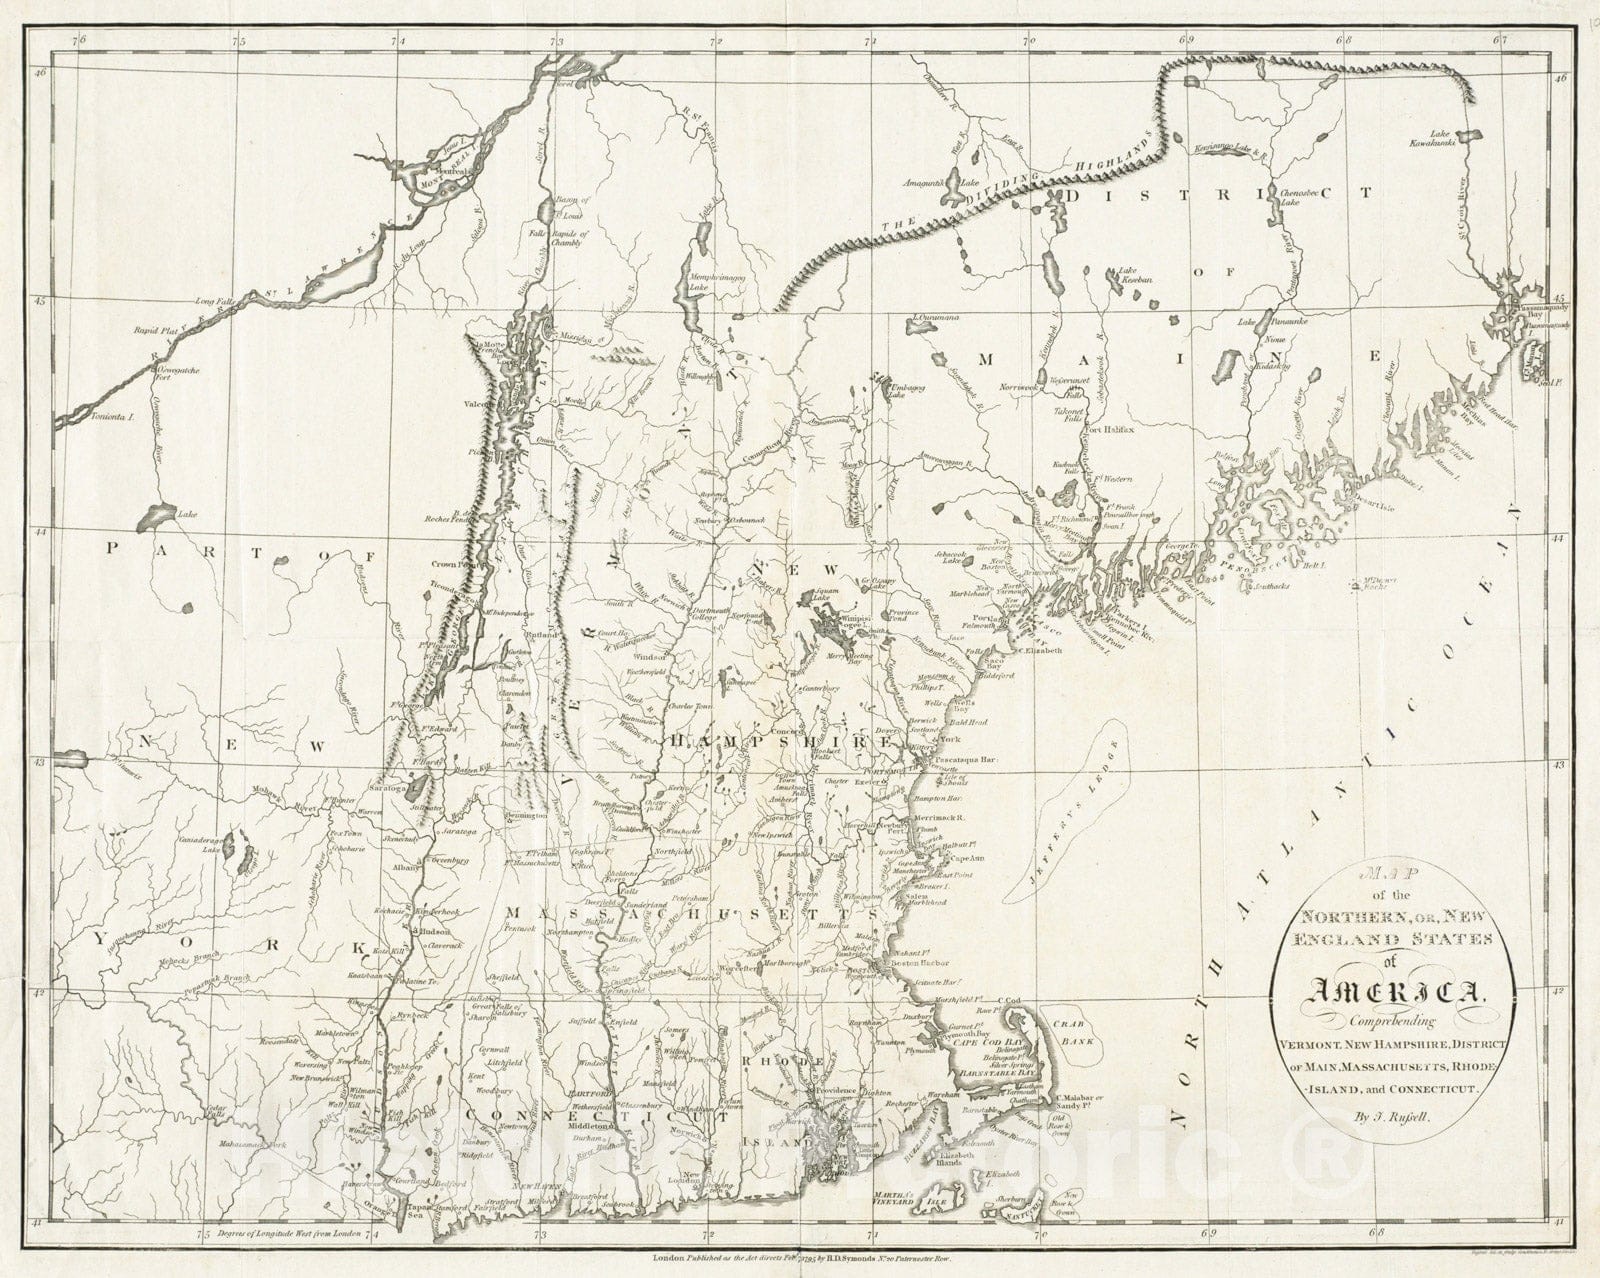 Historical Map, 1795 Map of The Northern, or, New England States of America, comprehending Vermont, New Hampshire, District of Main, Massachusetts, Rhode Island, and Connecticut Reprint